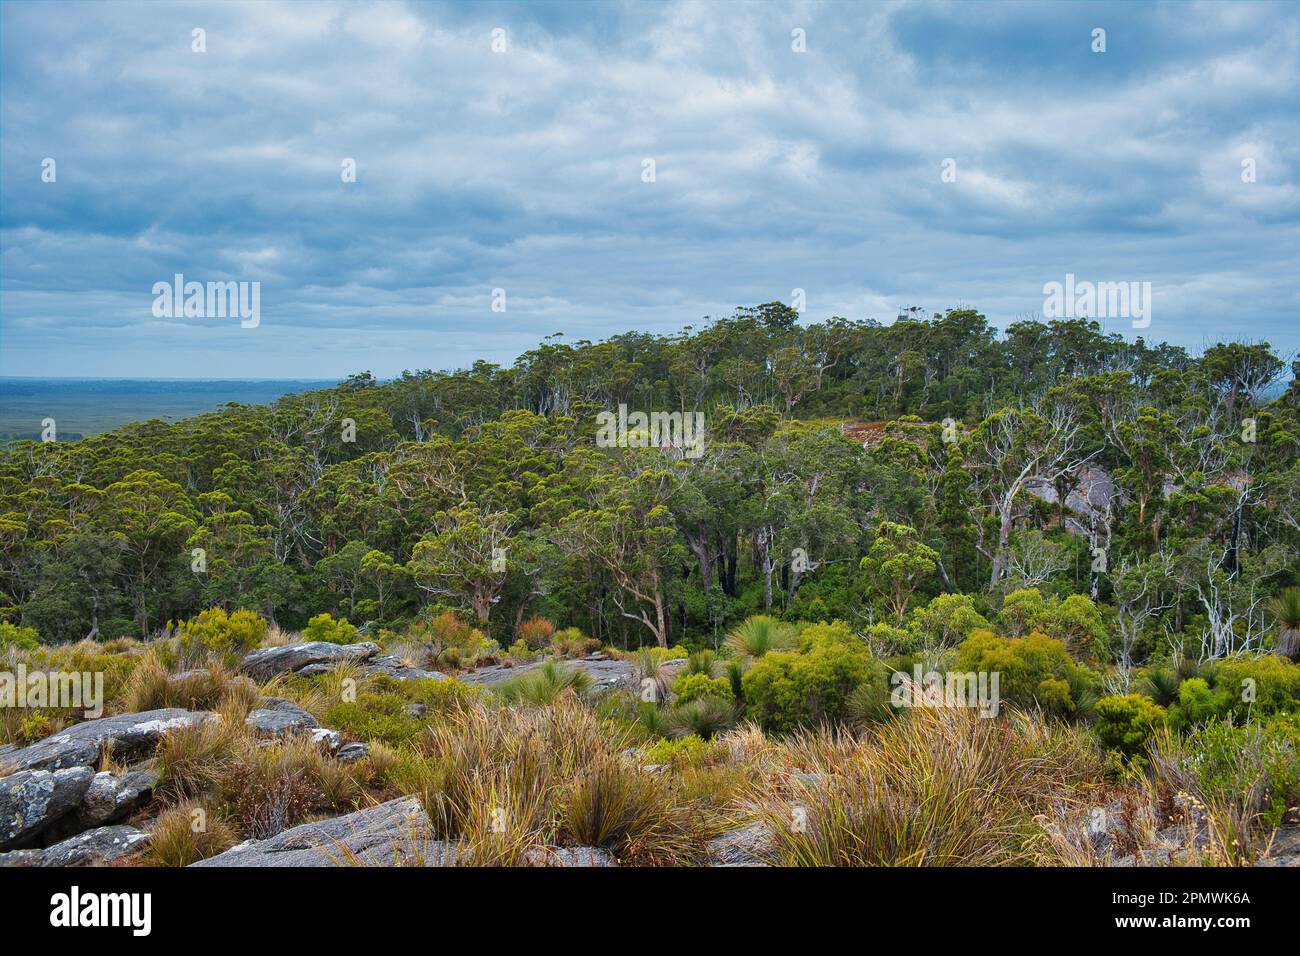 Dense forest of eucalyptus trees on the lower slopes of Mount Chudalup, an ecological island in D'Entrecasteaux National Park, Western Australia Stock Photo